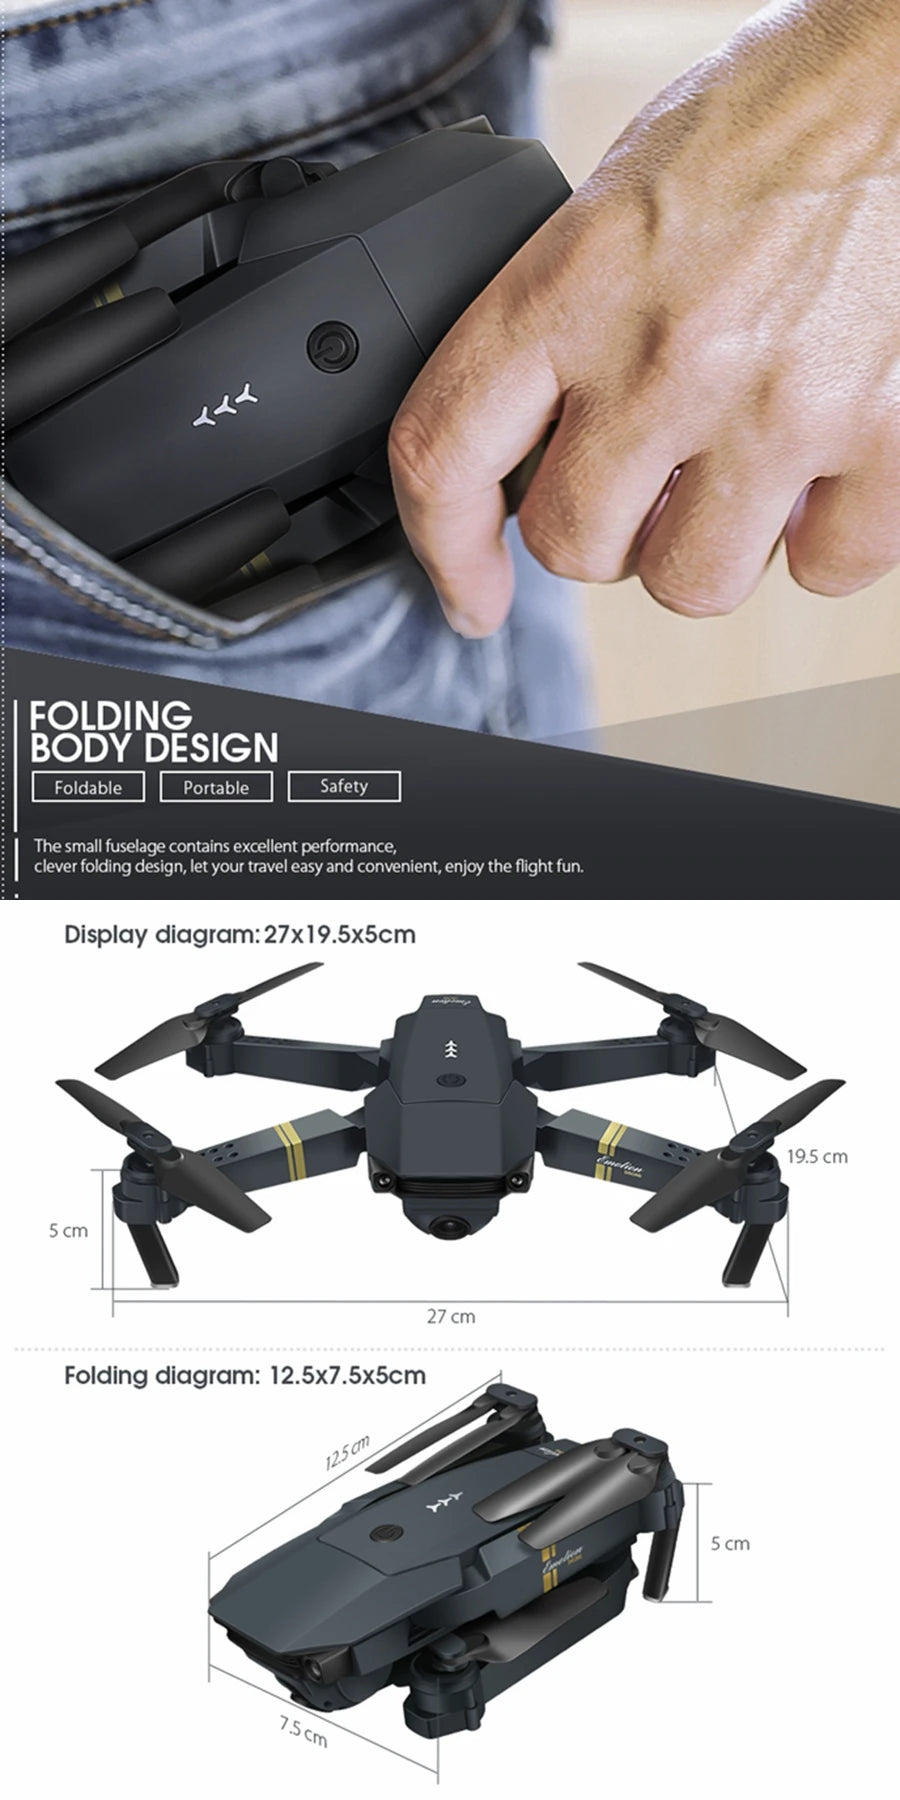 Eachine E58 Drone, folding body design foldable portable safety the small fuselage contains excellent performance